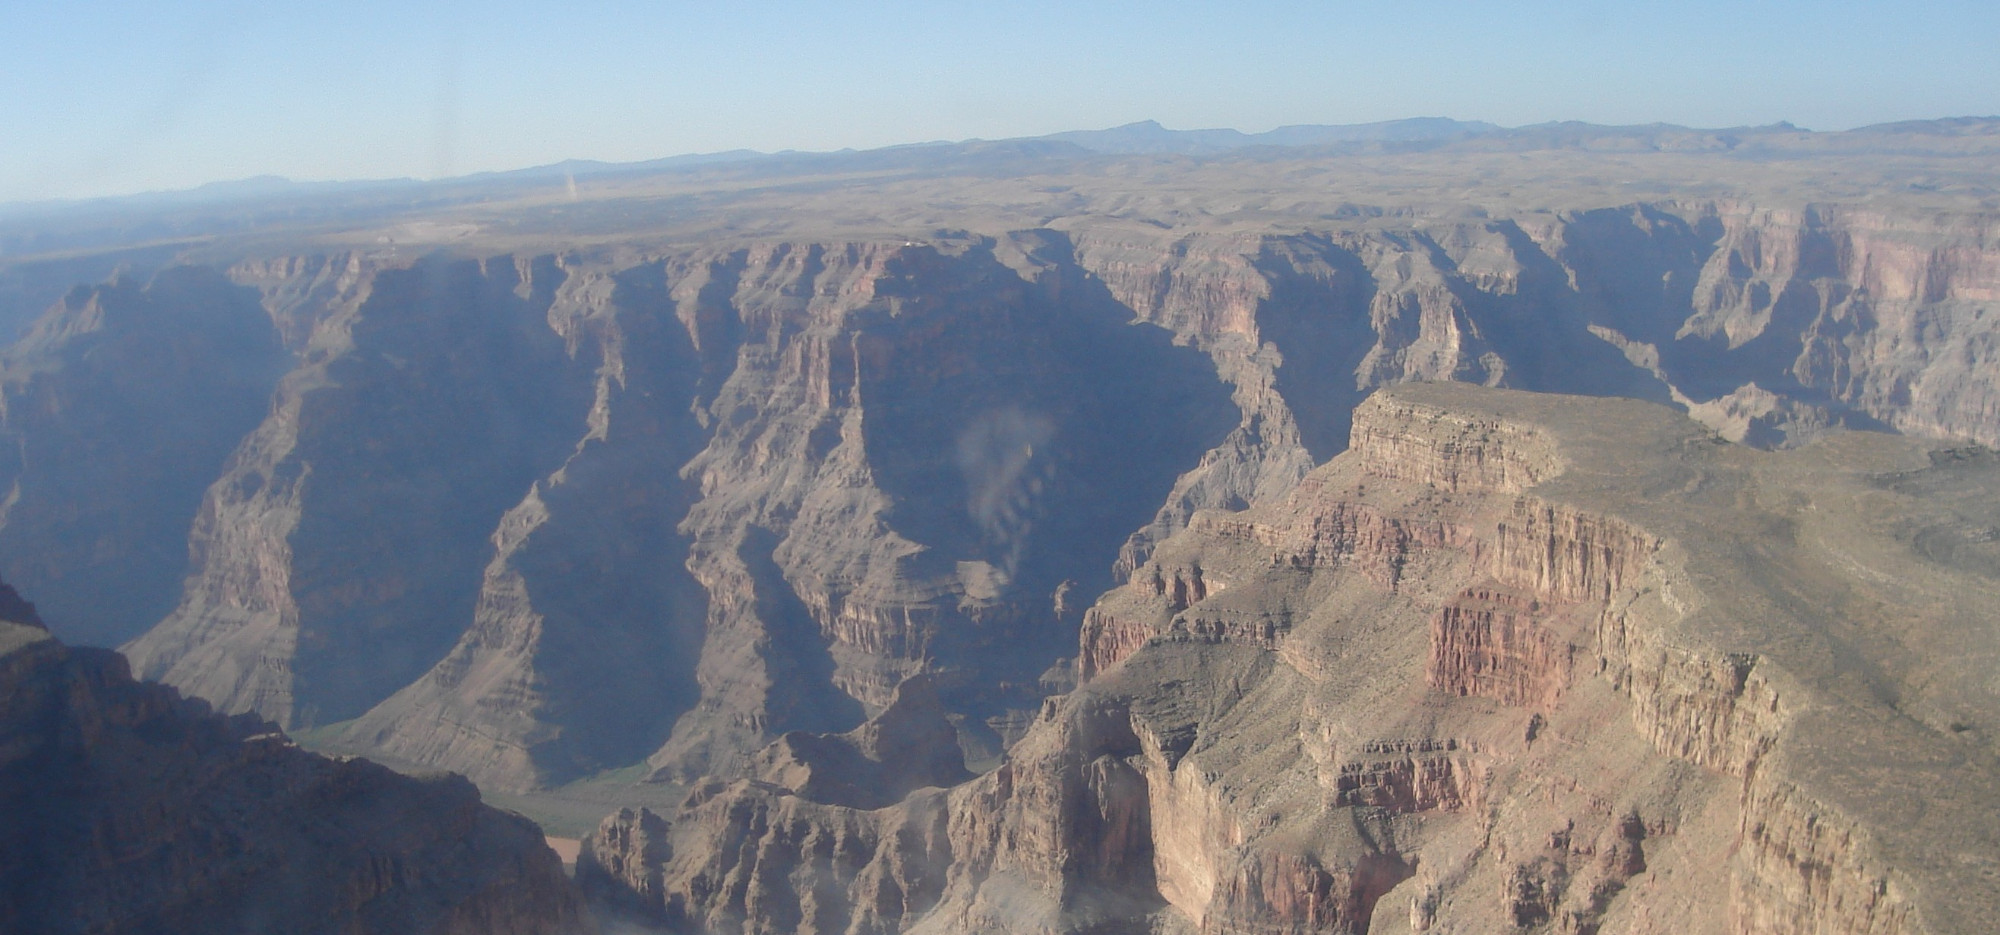 Canyon view from above